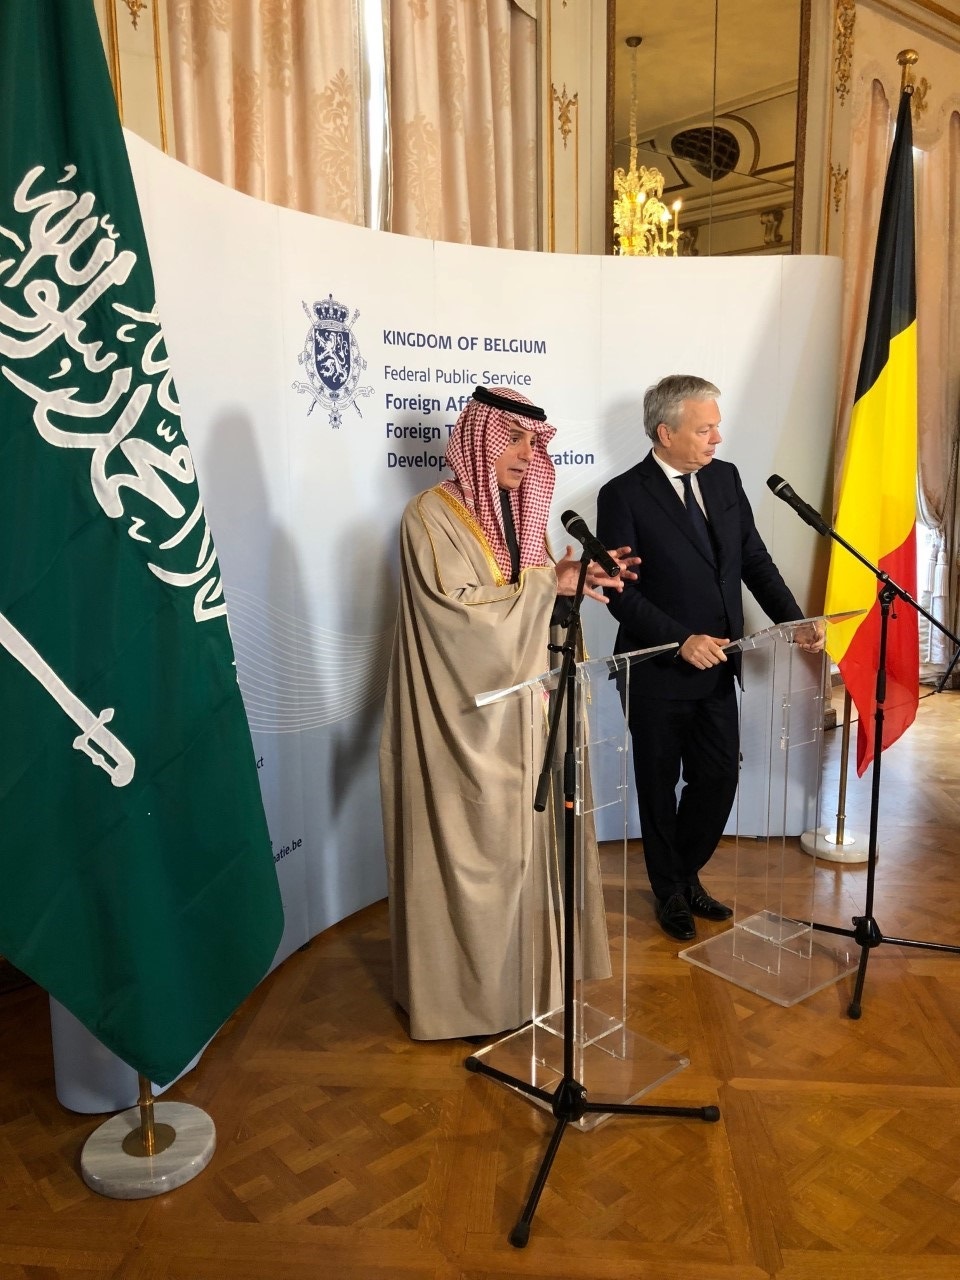 Saudi FM Adel Al Jubeir with Belgian FM Didider Reynders at the press conference